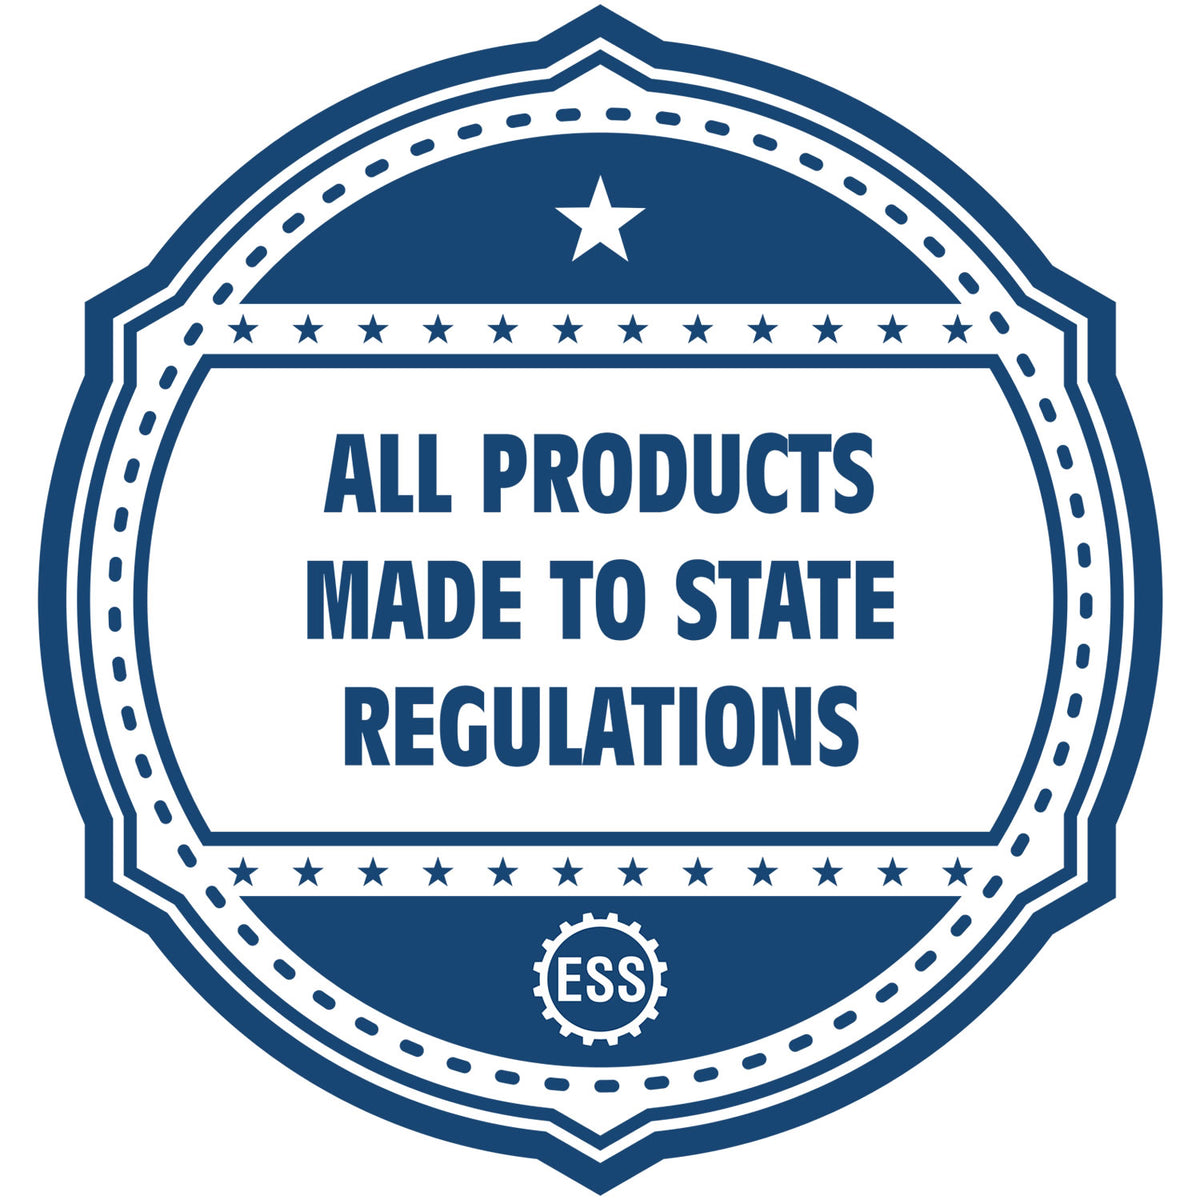 An icon or badge element for the Soft District of Columbia Professional Engineer Seal showing that this product is made in compliance with state regulations.